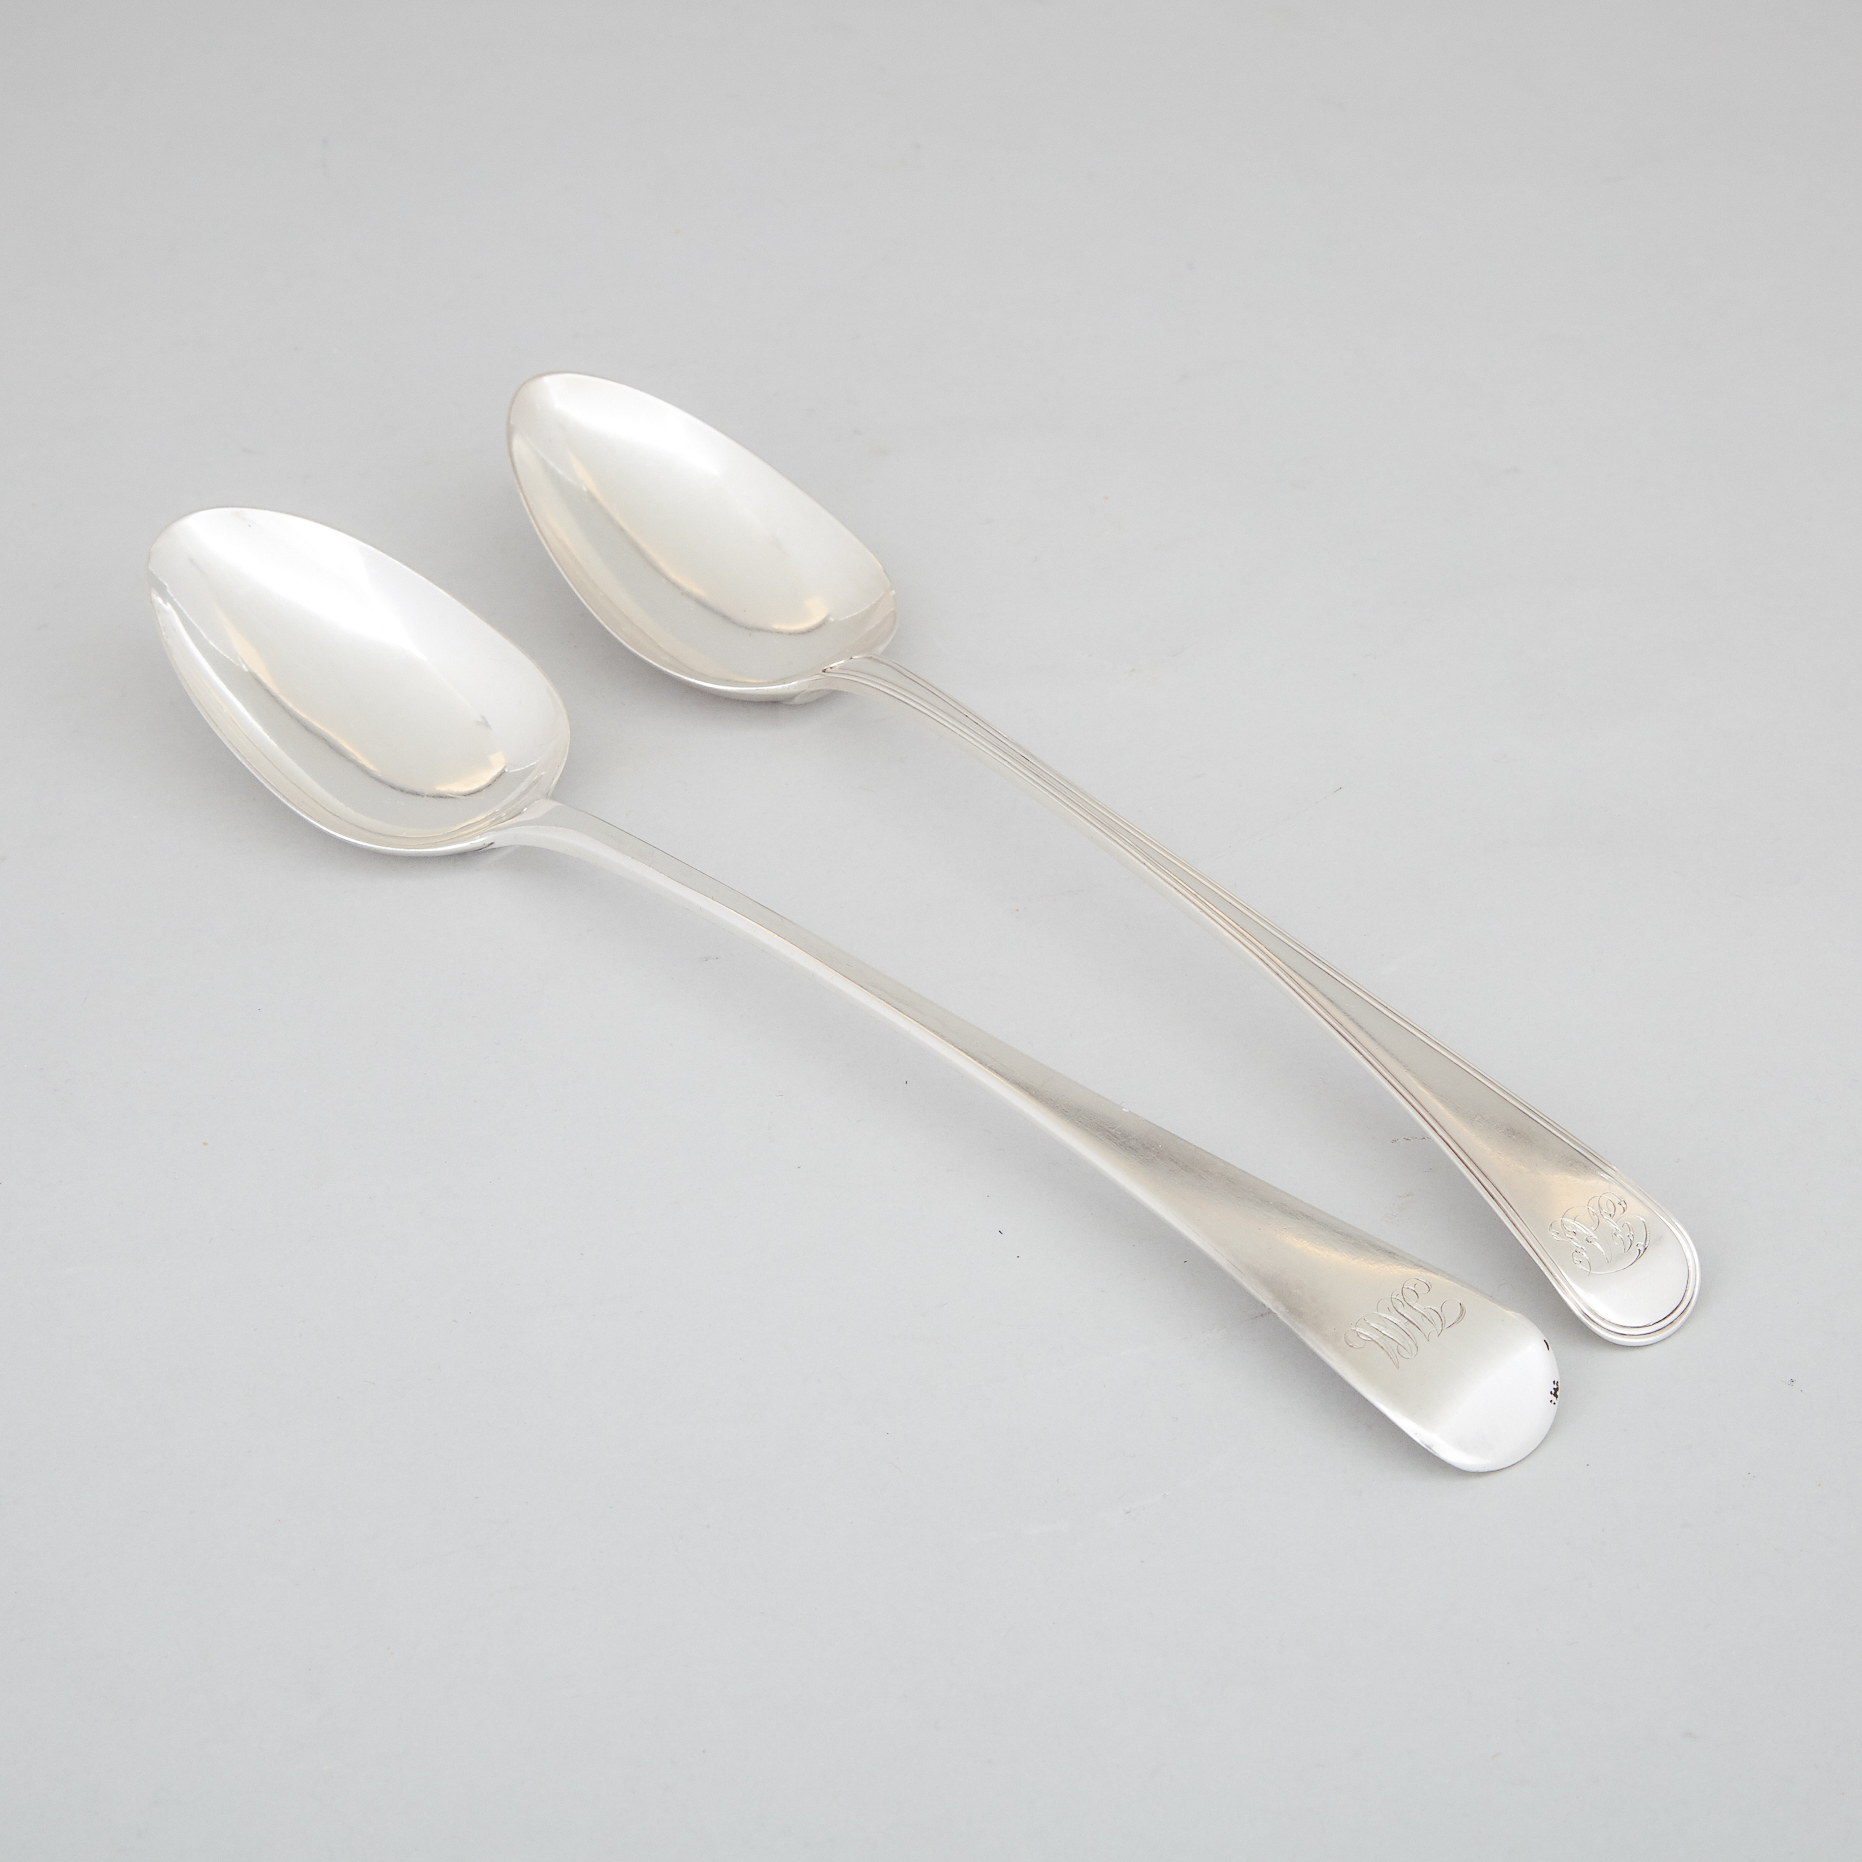 Two George III Silver Thread and Old English Pattern Serving Spoons, George Smith III & William Fearn and Richard Crossley & George Smith IV, London 1794/1806